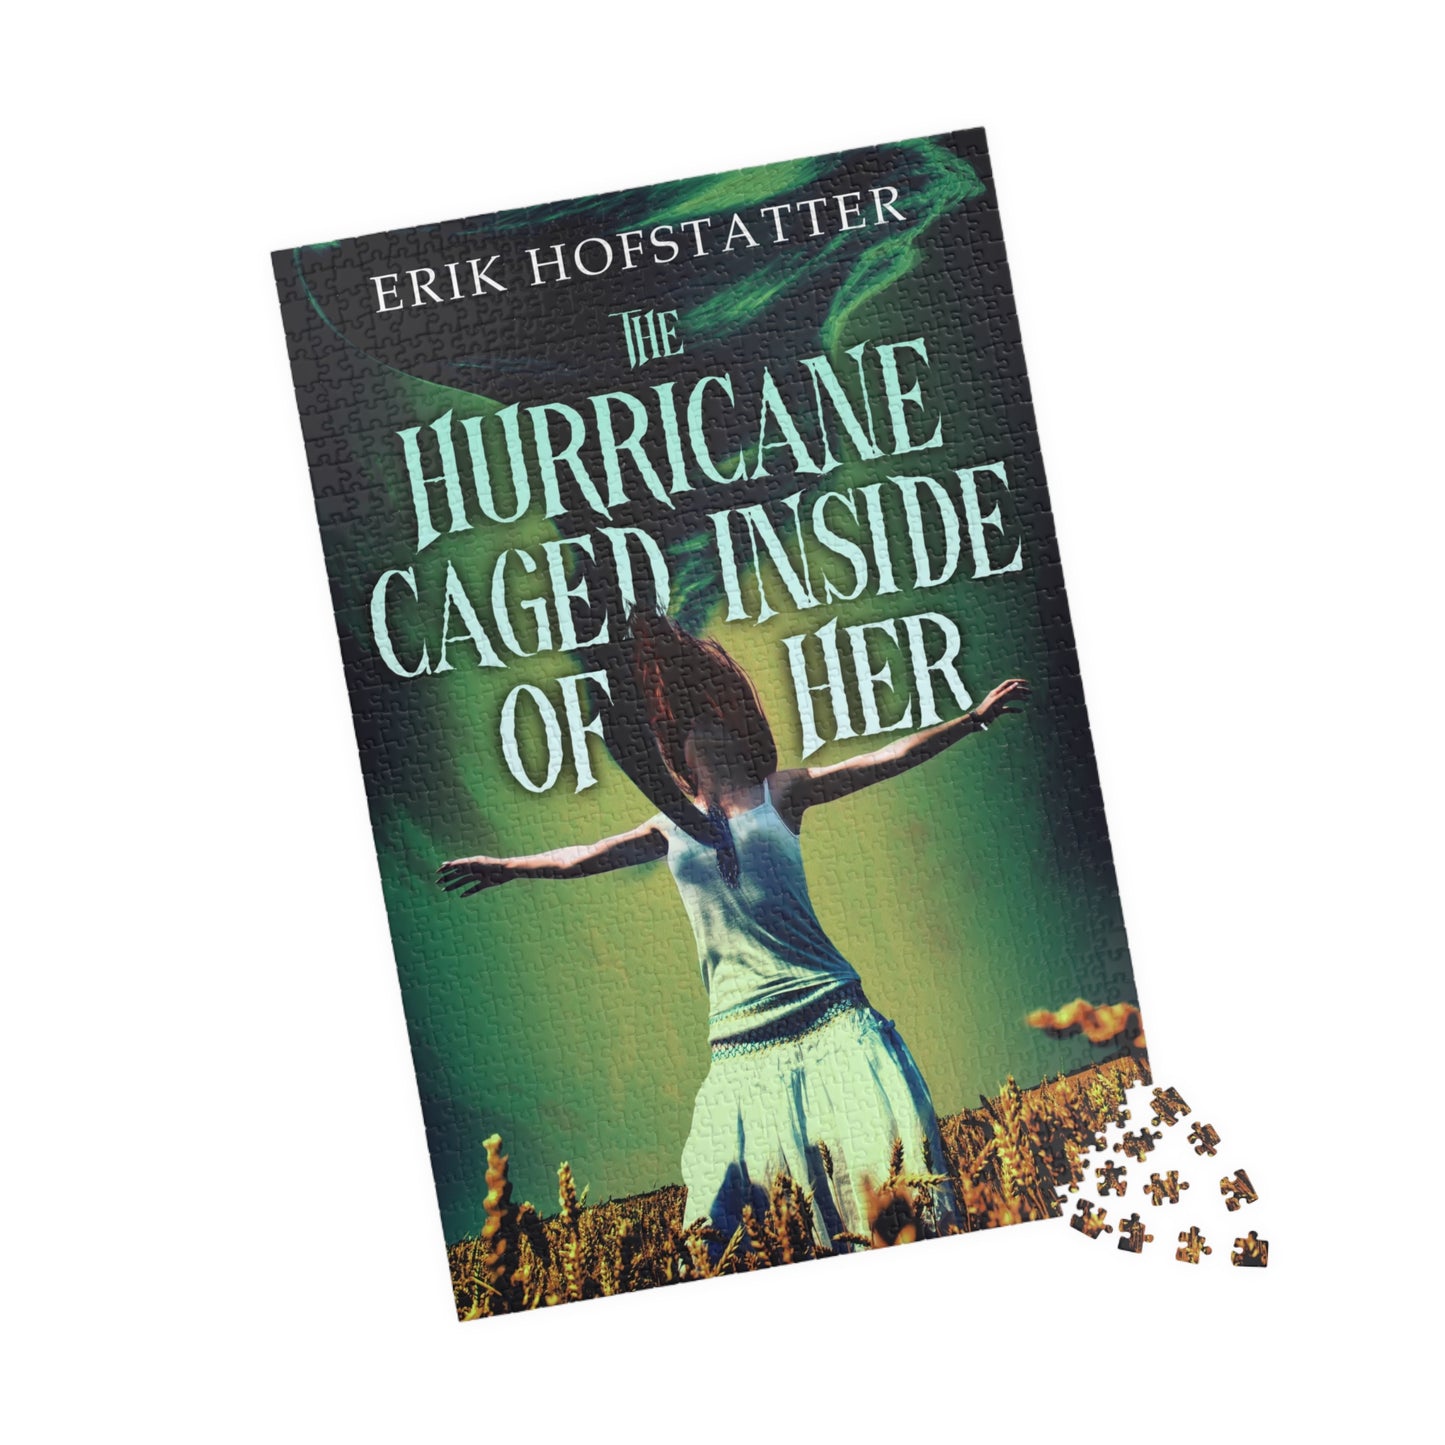 The Hurricane Caged Inside of Her - 1000 Piece Jigsaw Puzzle